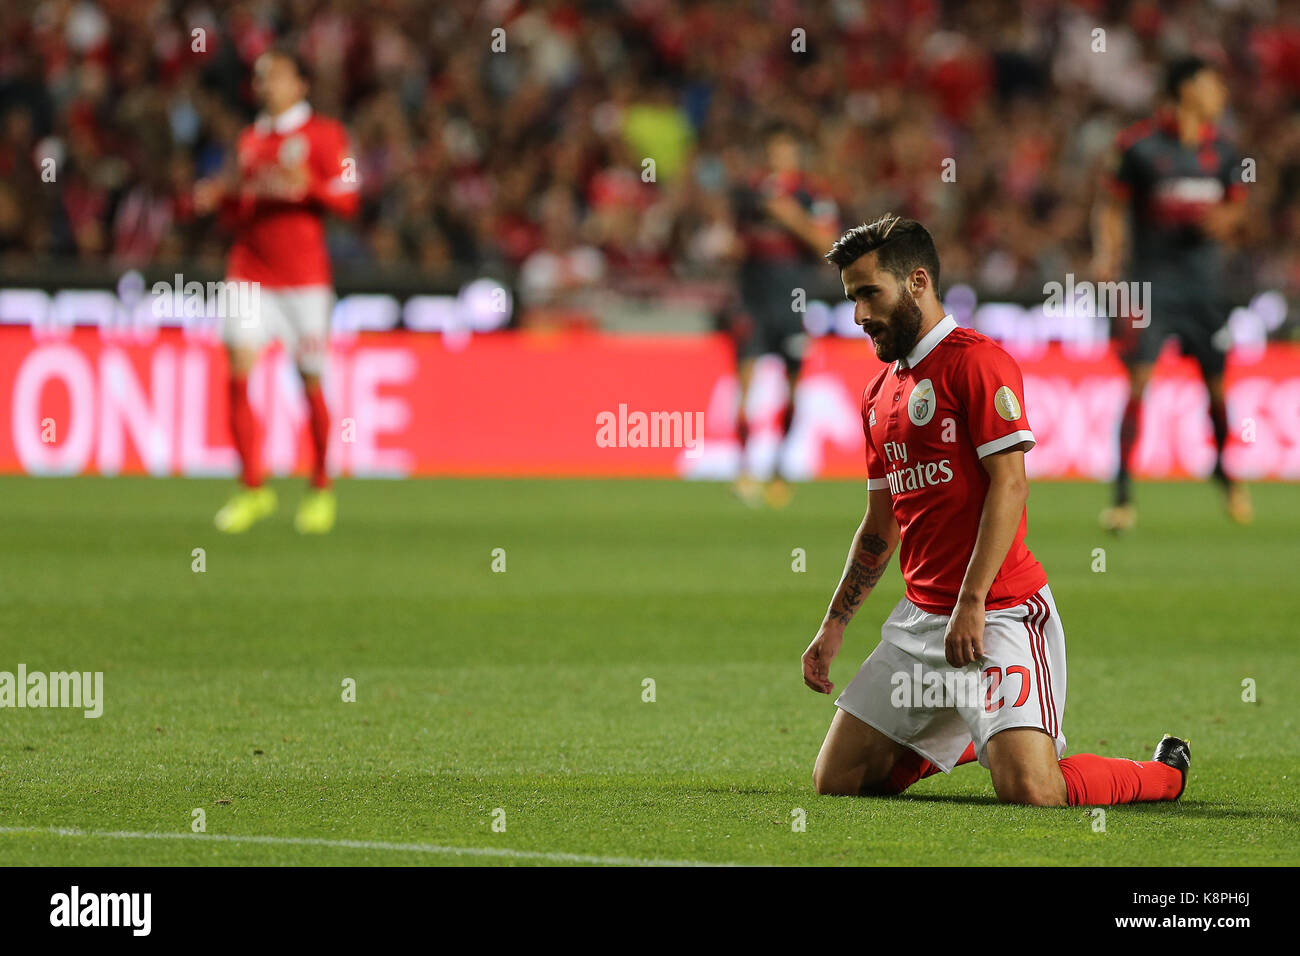 Lisbon, Portugal. 20th Sep, 2017. Benfica's forward Rafa Silva from Portugal during the Portuguese Cup 2017/18 match between SL Benfica v SC Braga, at Luz Stadium in Lisbon on September 20, 2017. Credit: Bruno Barros/Alamy Live News Stock Photo